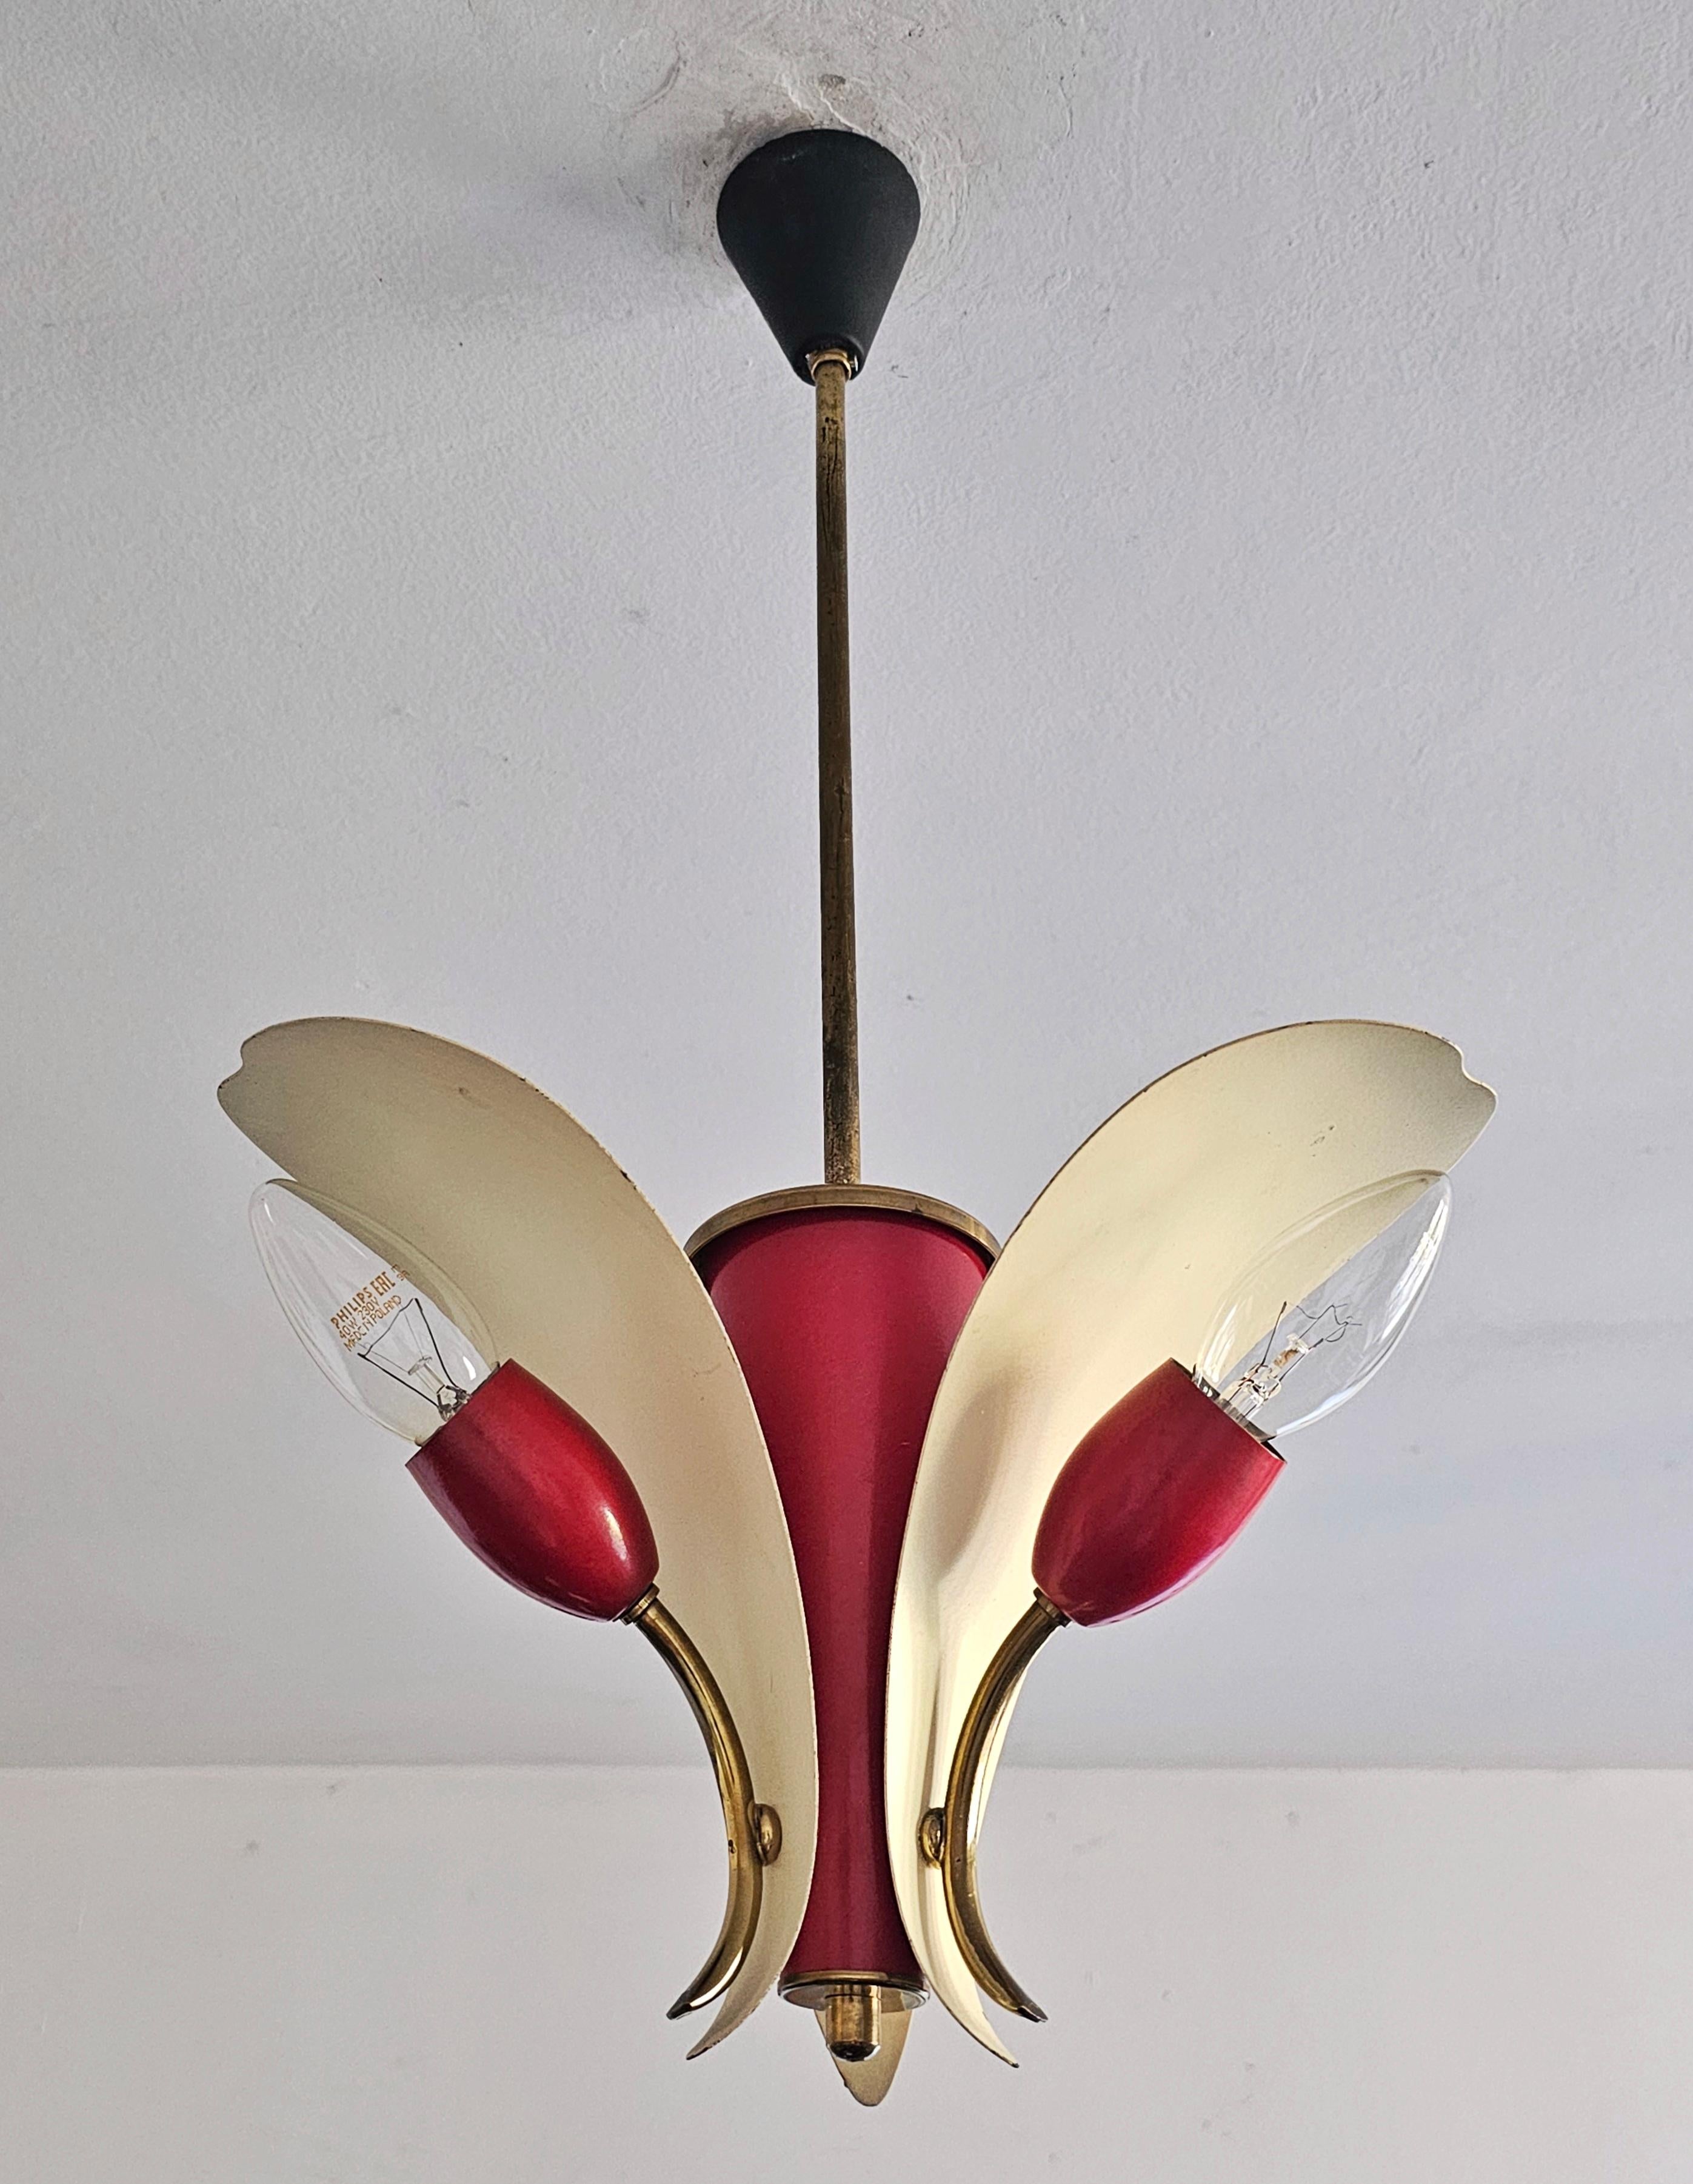 In this listing you will find a very rare Mid Century Modern pendant light or small chandelier designed by Fog and Morup. It features beautiful, elegant design that reminds you of a flower in combination of red and cream, with brass fixture. Made in